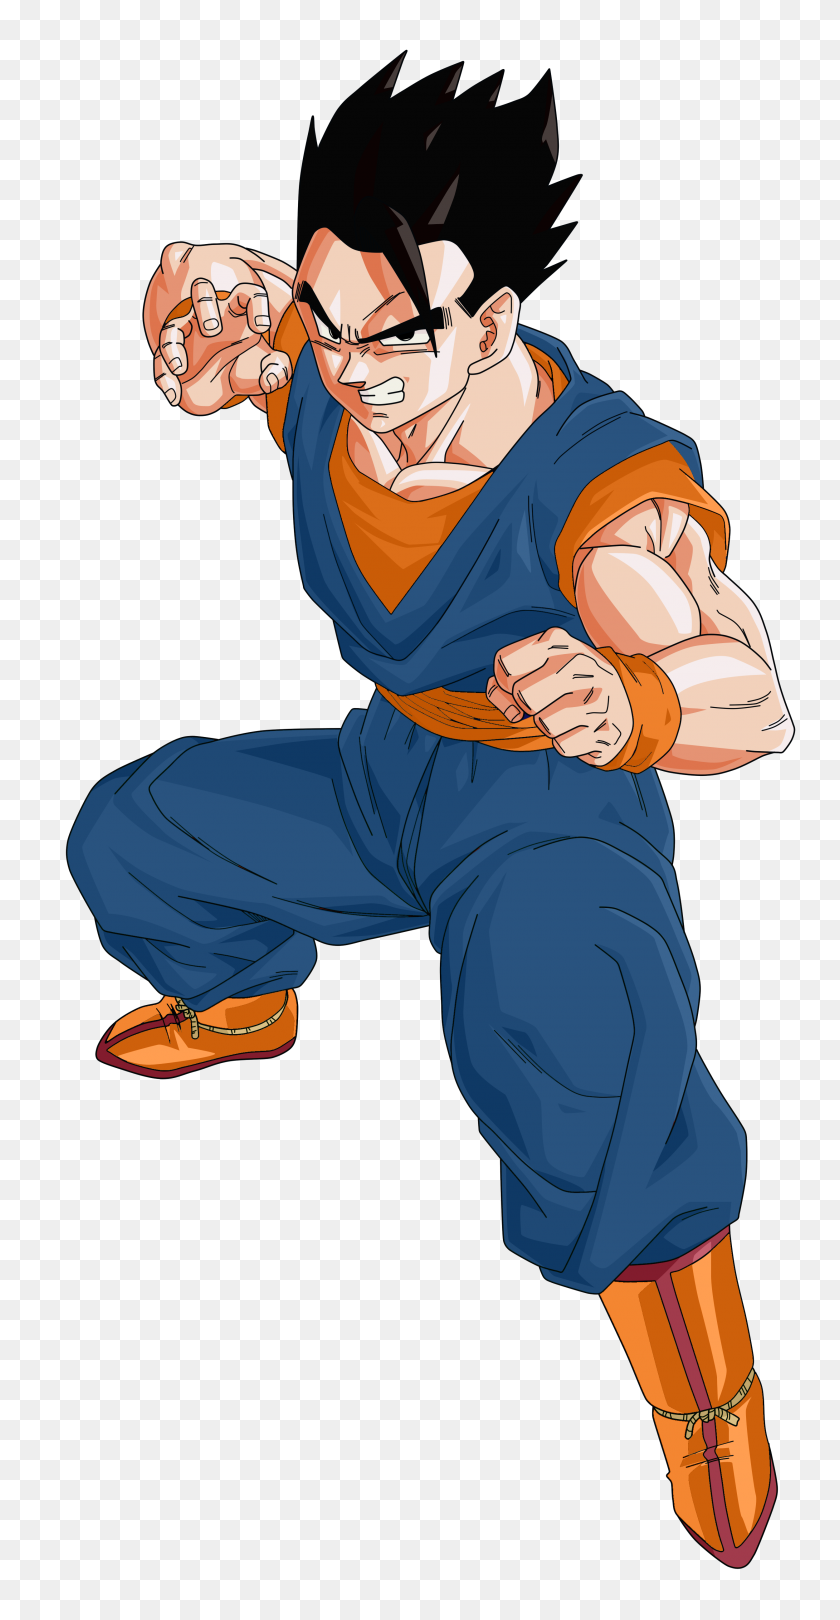 2500x5000 Some Hypothetical Ultimate Gohan Recolors Dragonballfighterz - Dragon Ball Fighterz PNG